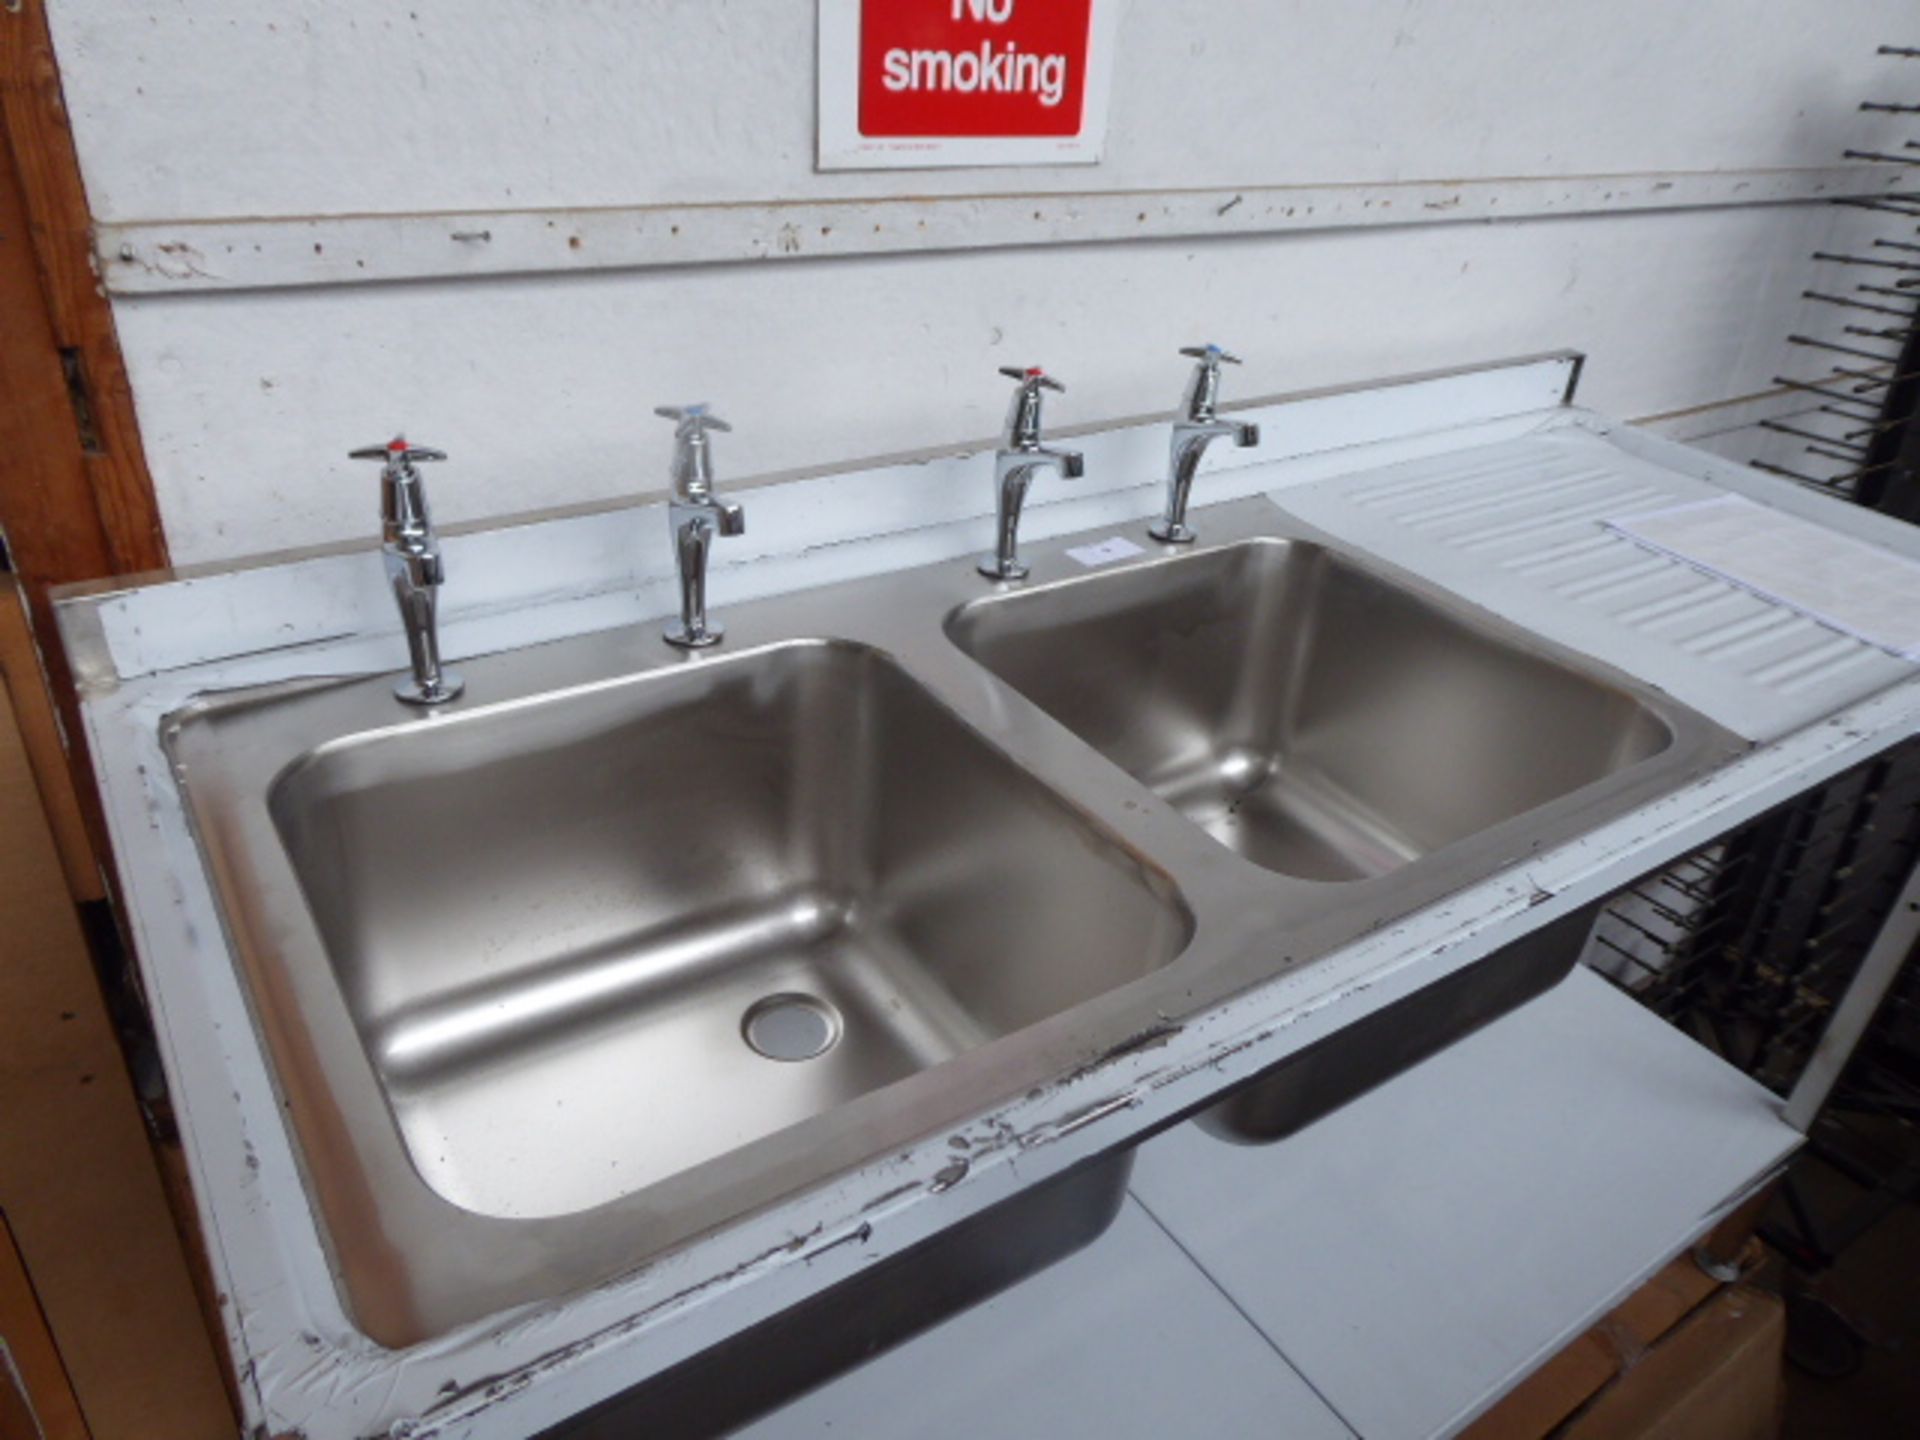 95 - 150cm 2 bowl stainless steel sink unit with draining board and shelf under with tap set - Image 2 of 2